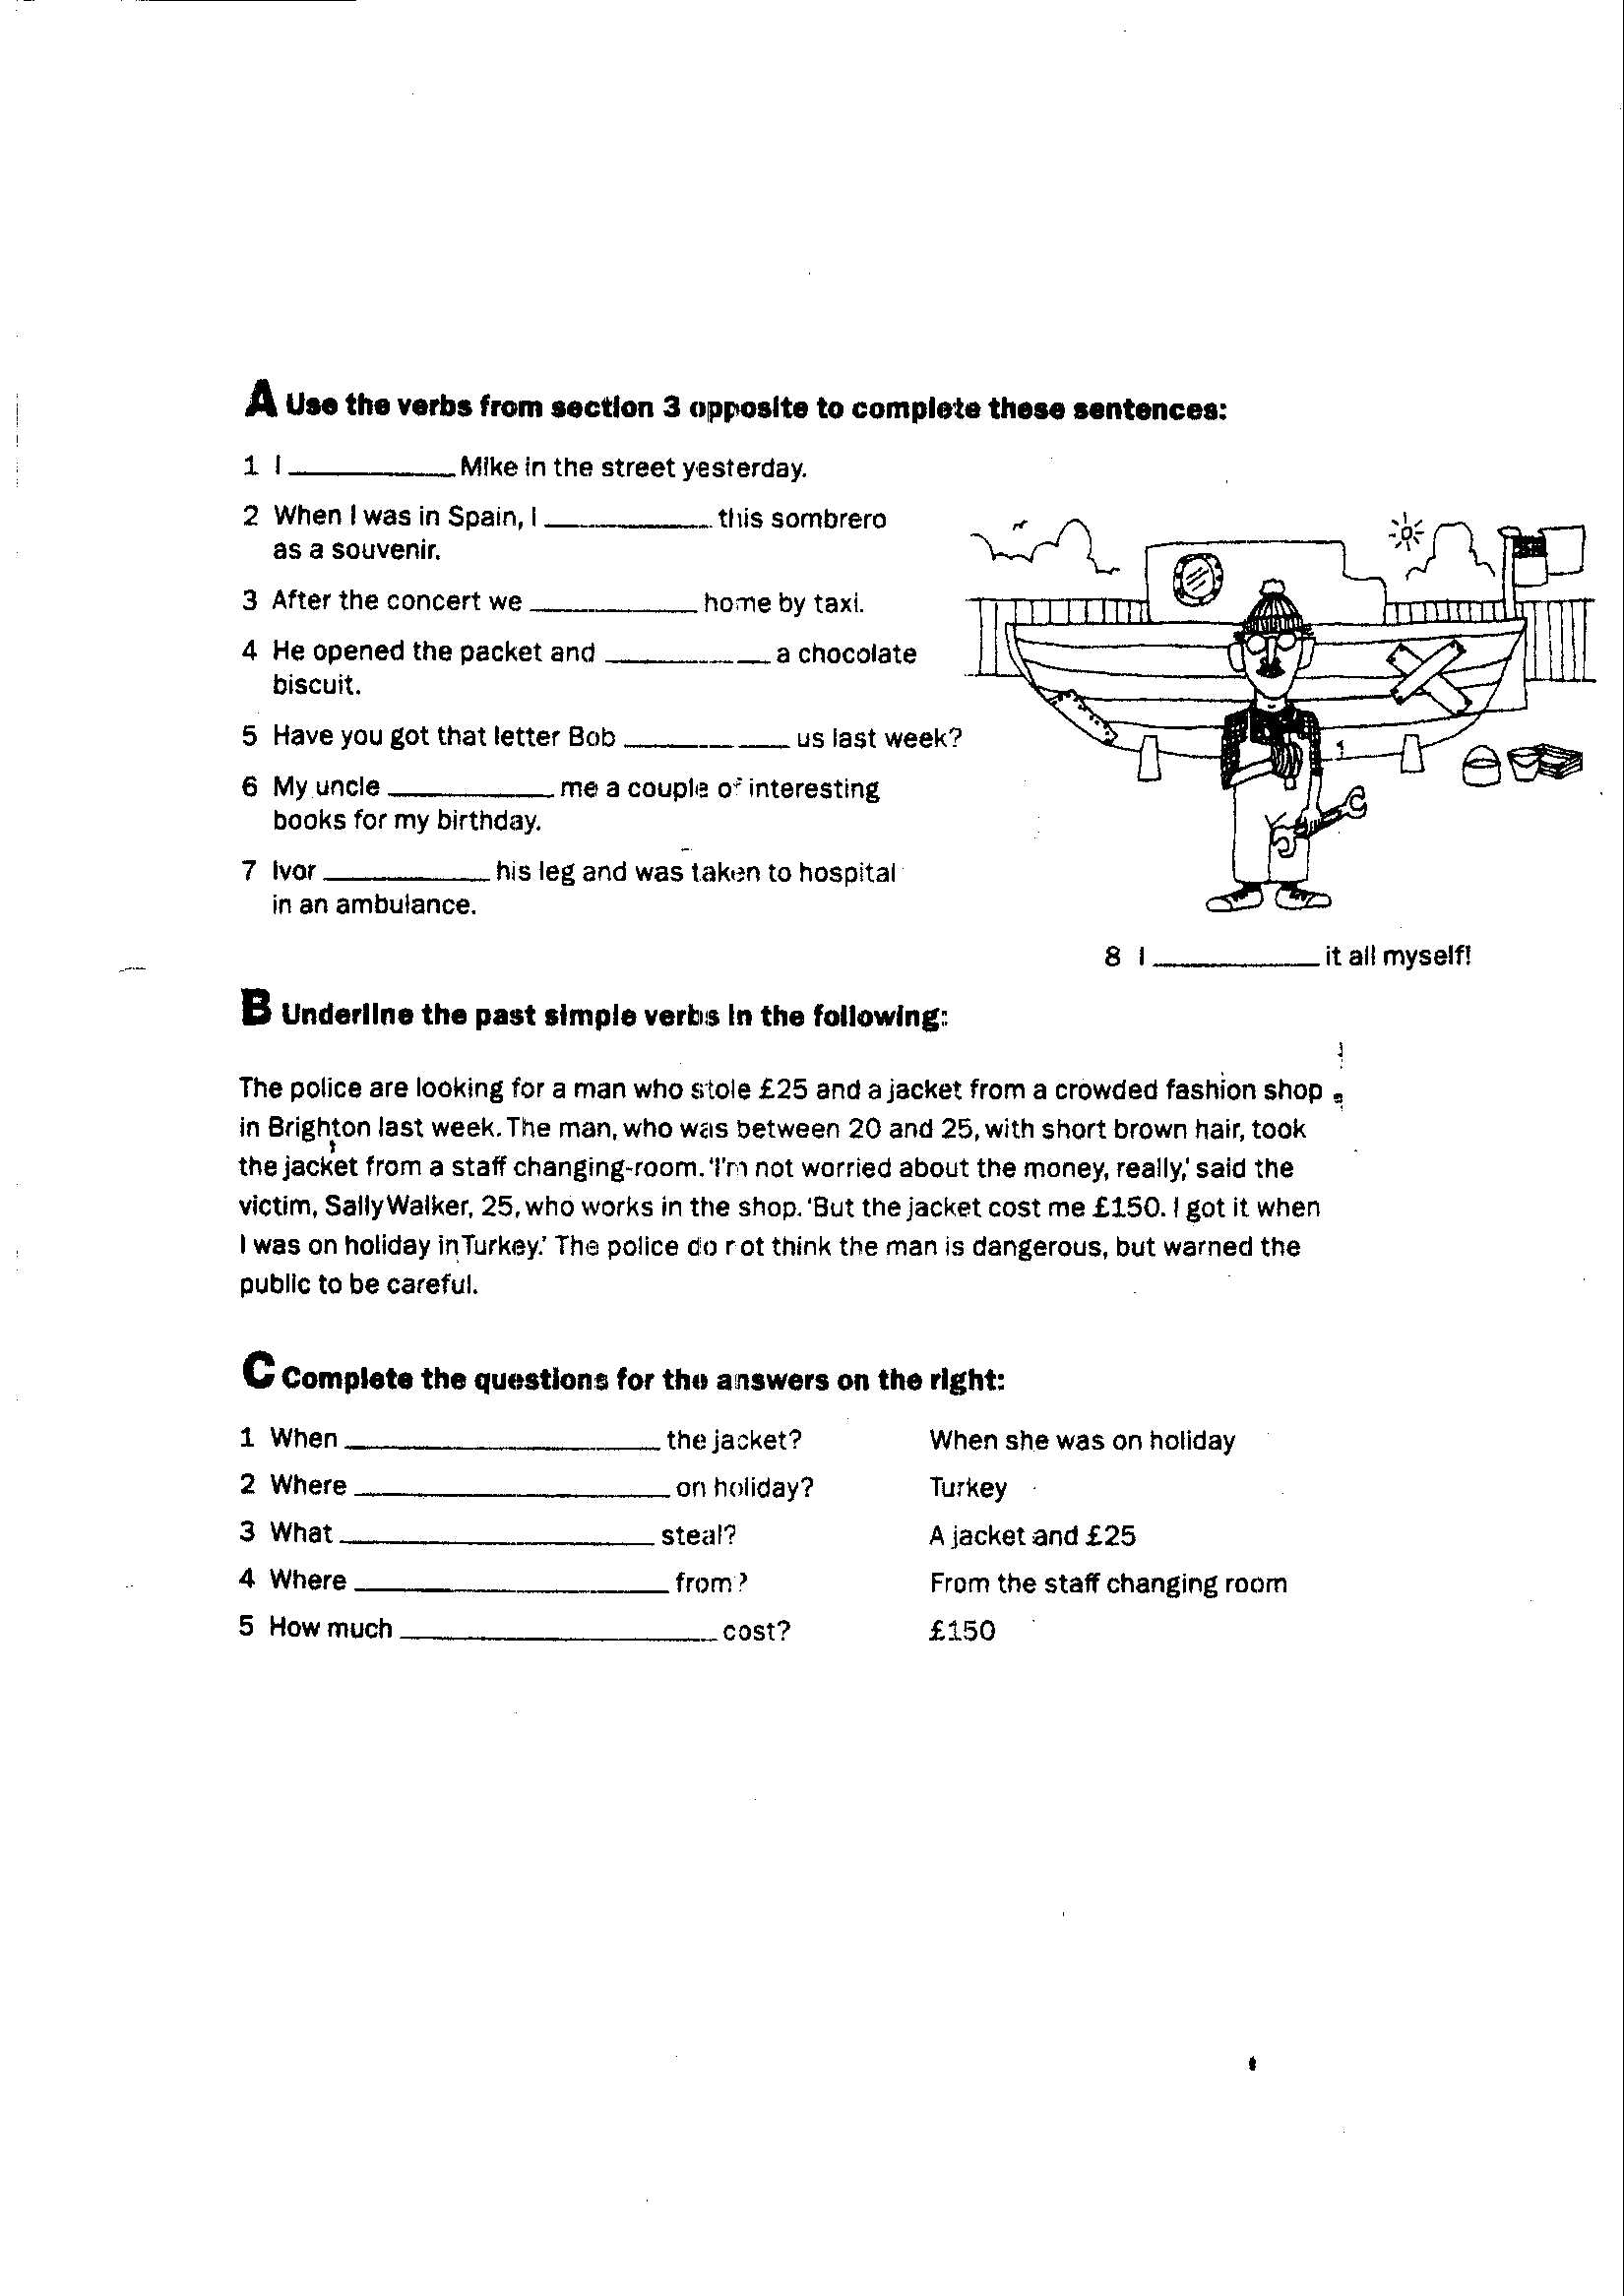 18-best-images-of-worksheets-past-tense-exercises-simple-past-tense-exercises-past-present